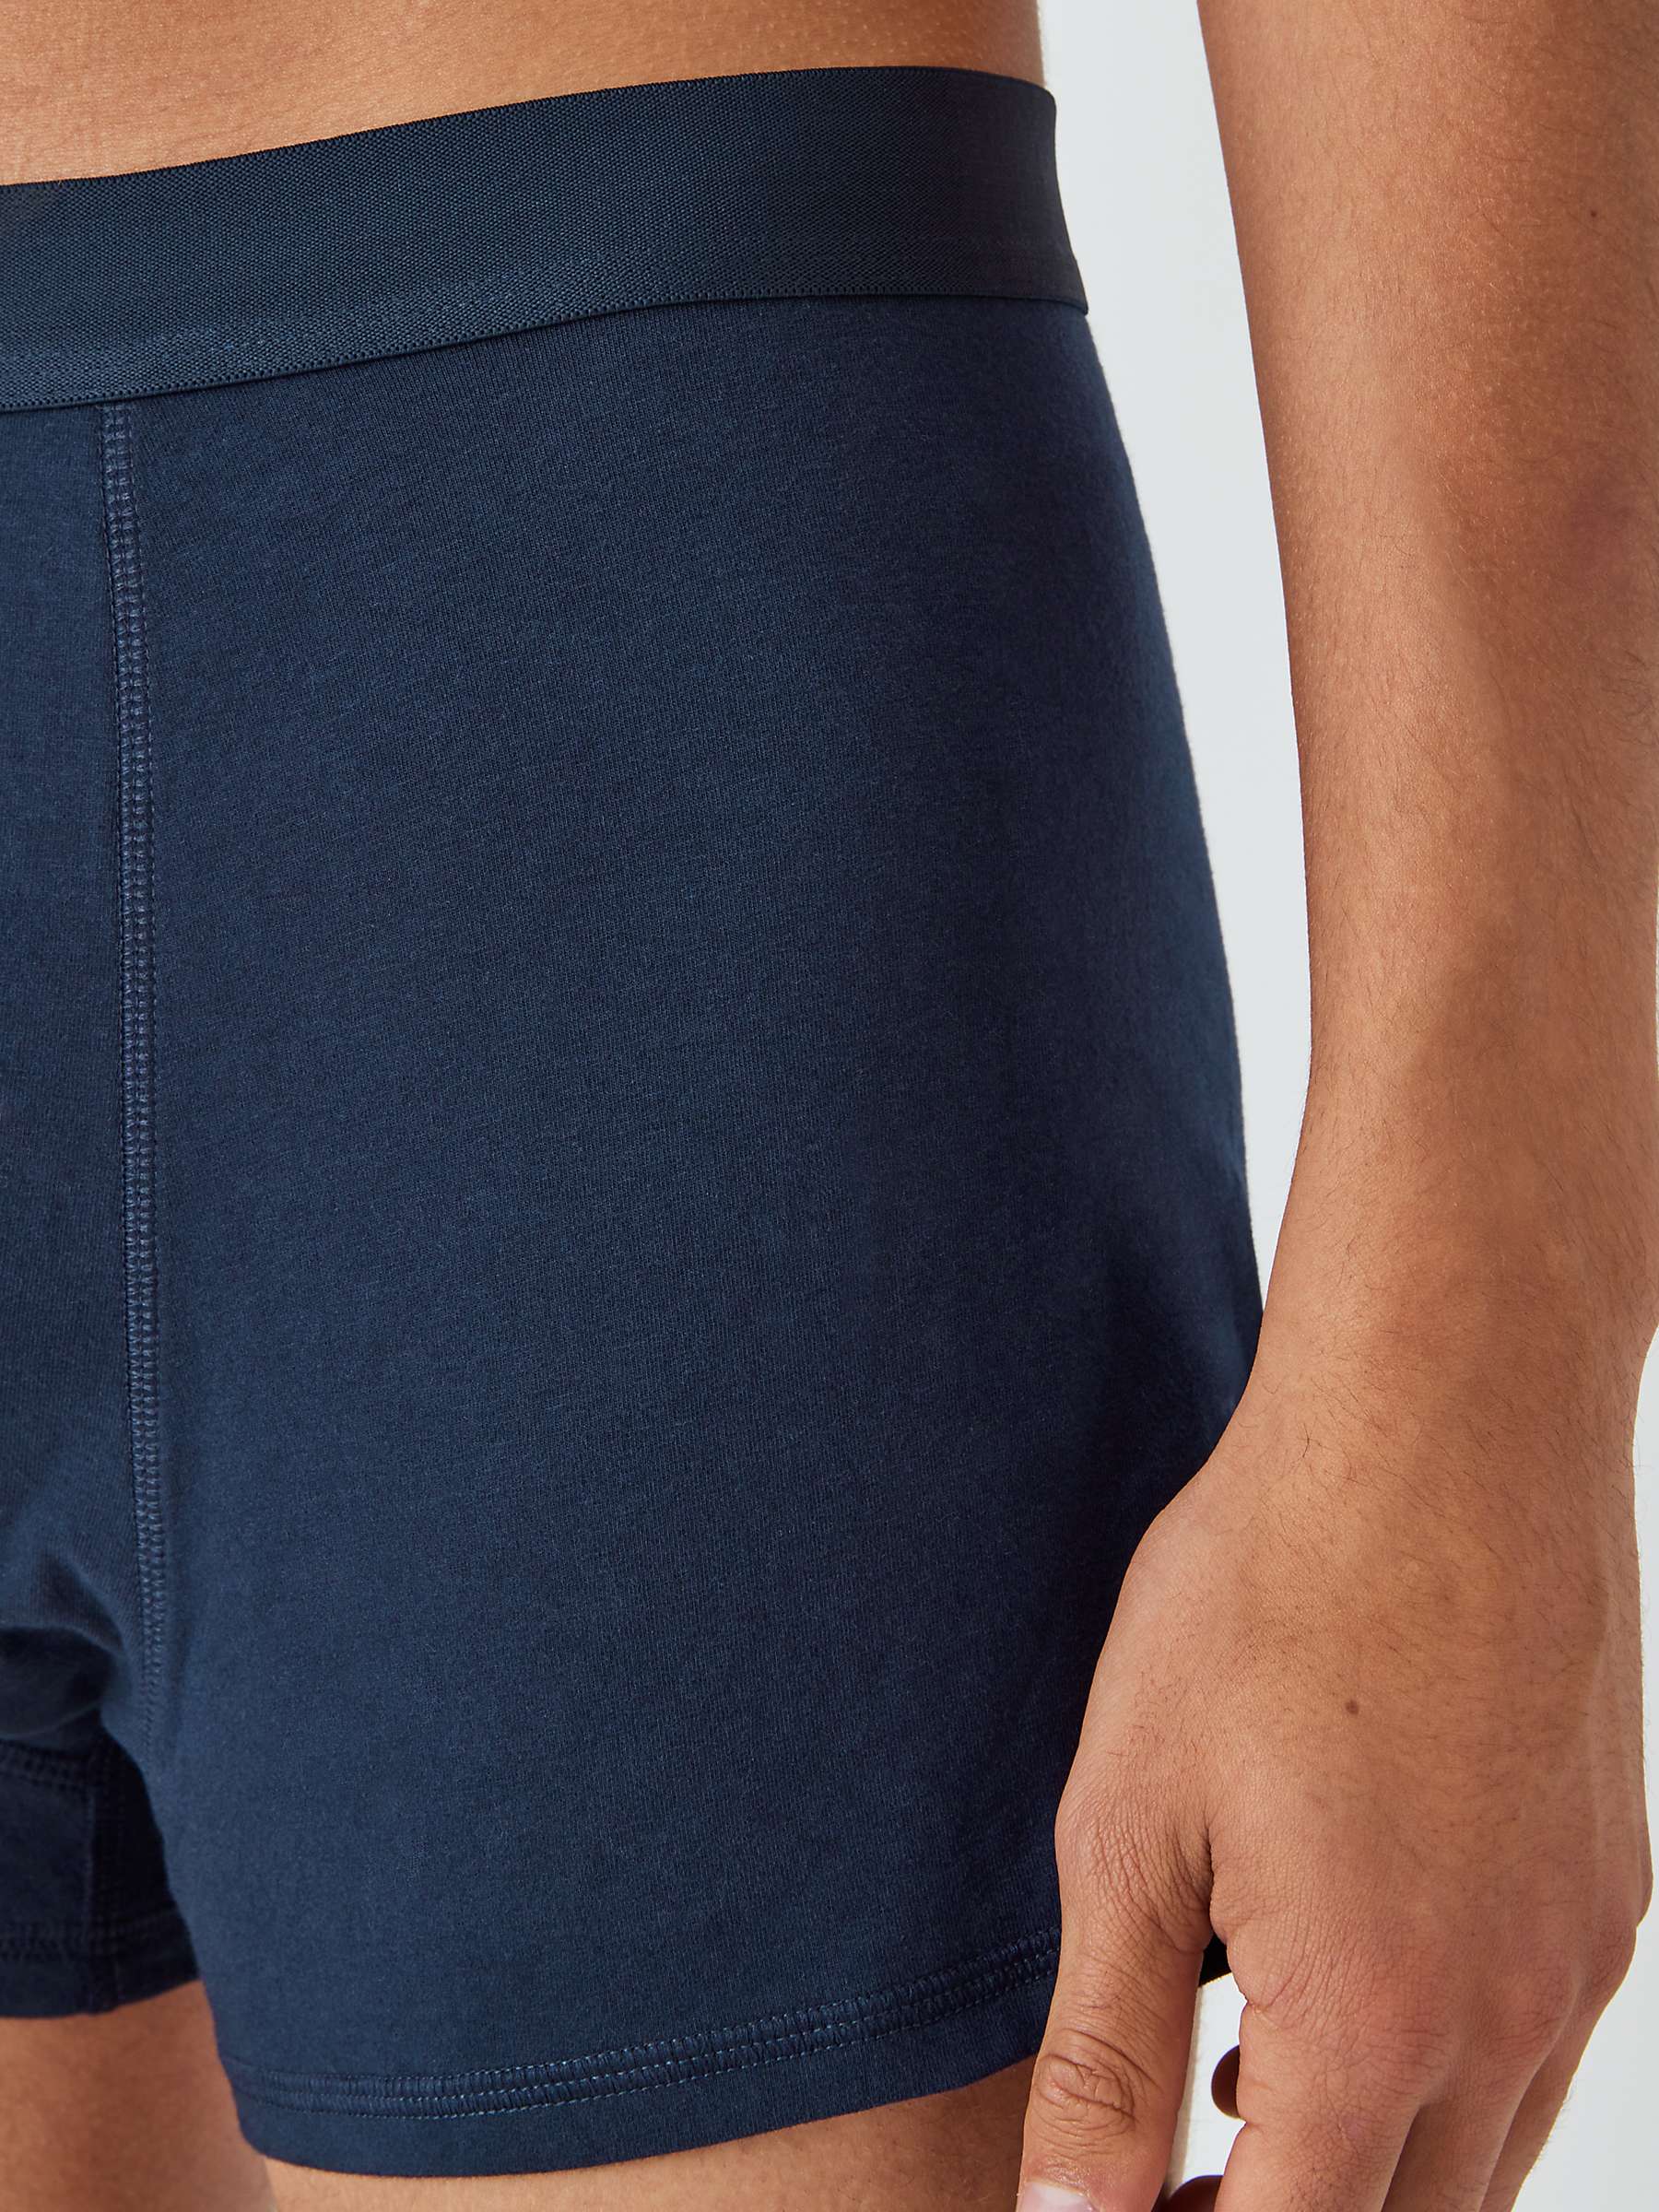 Buy John Lewis ANYDAY Stretch Cotton Plain Trunks, Pack of 5, Navy Online at johnlewis.com